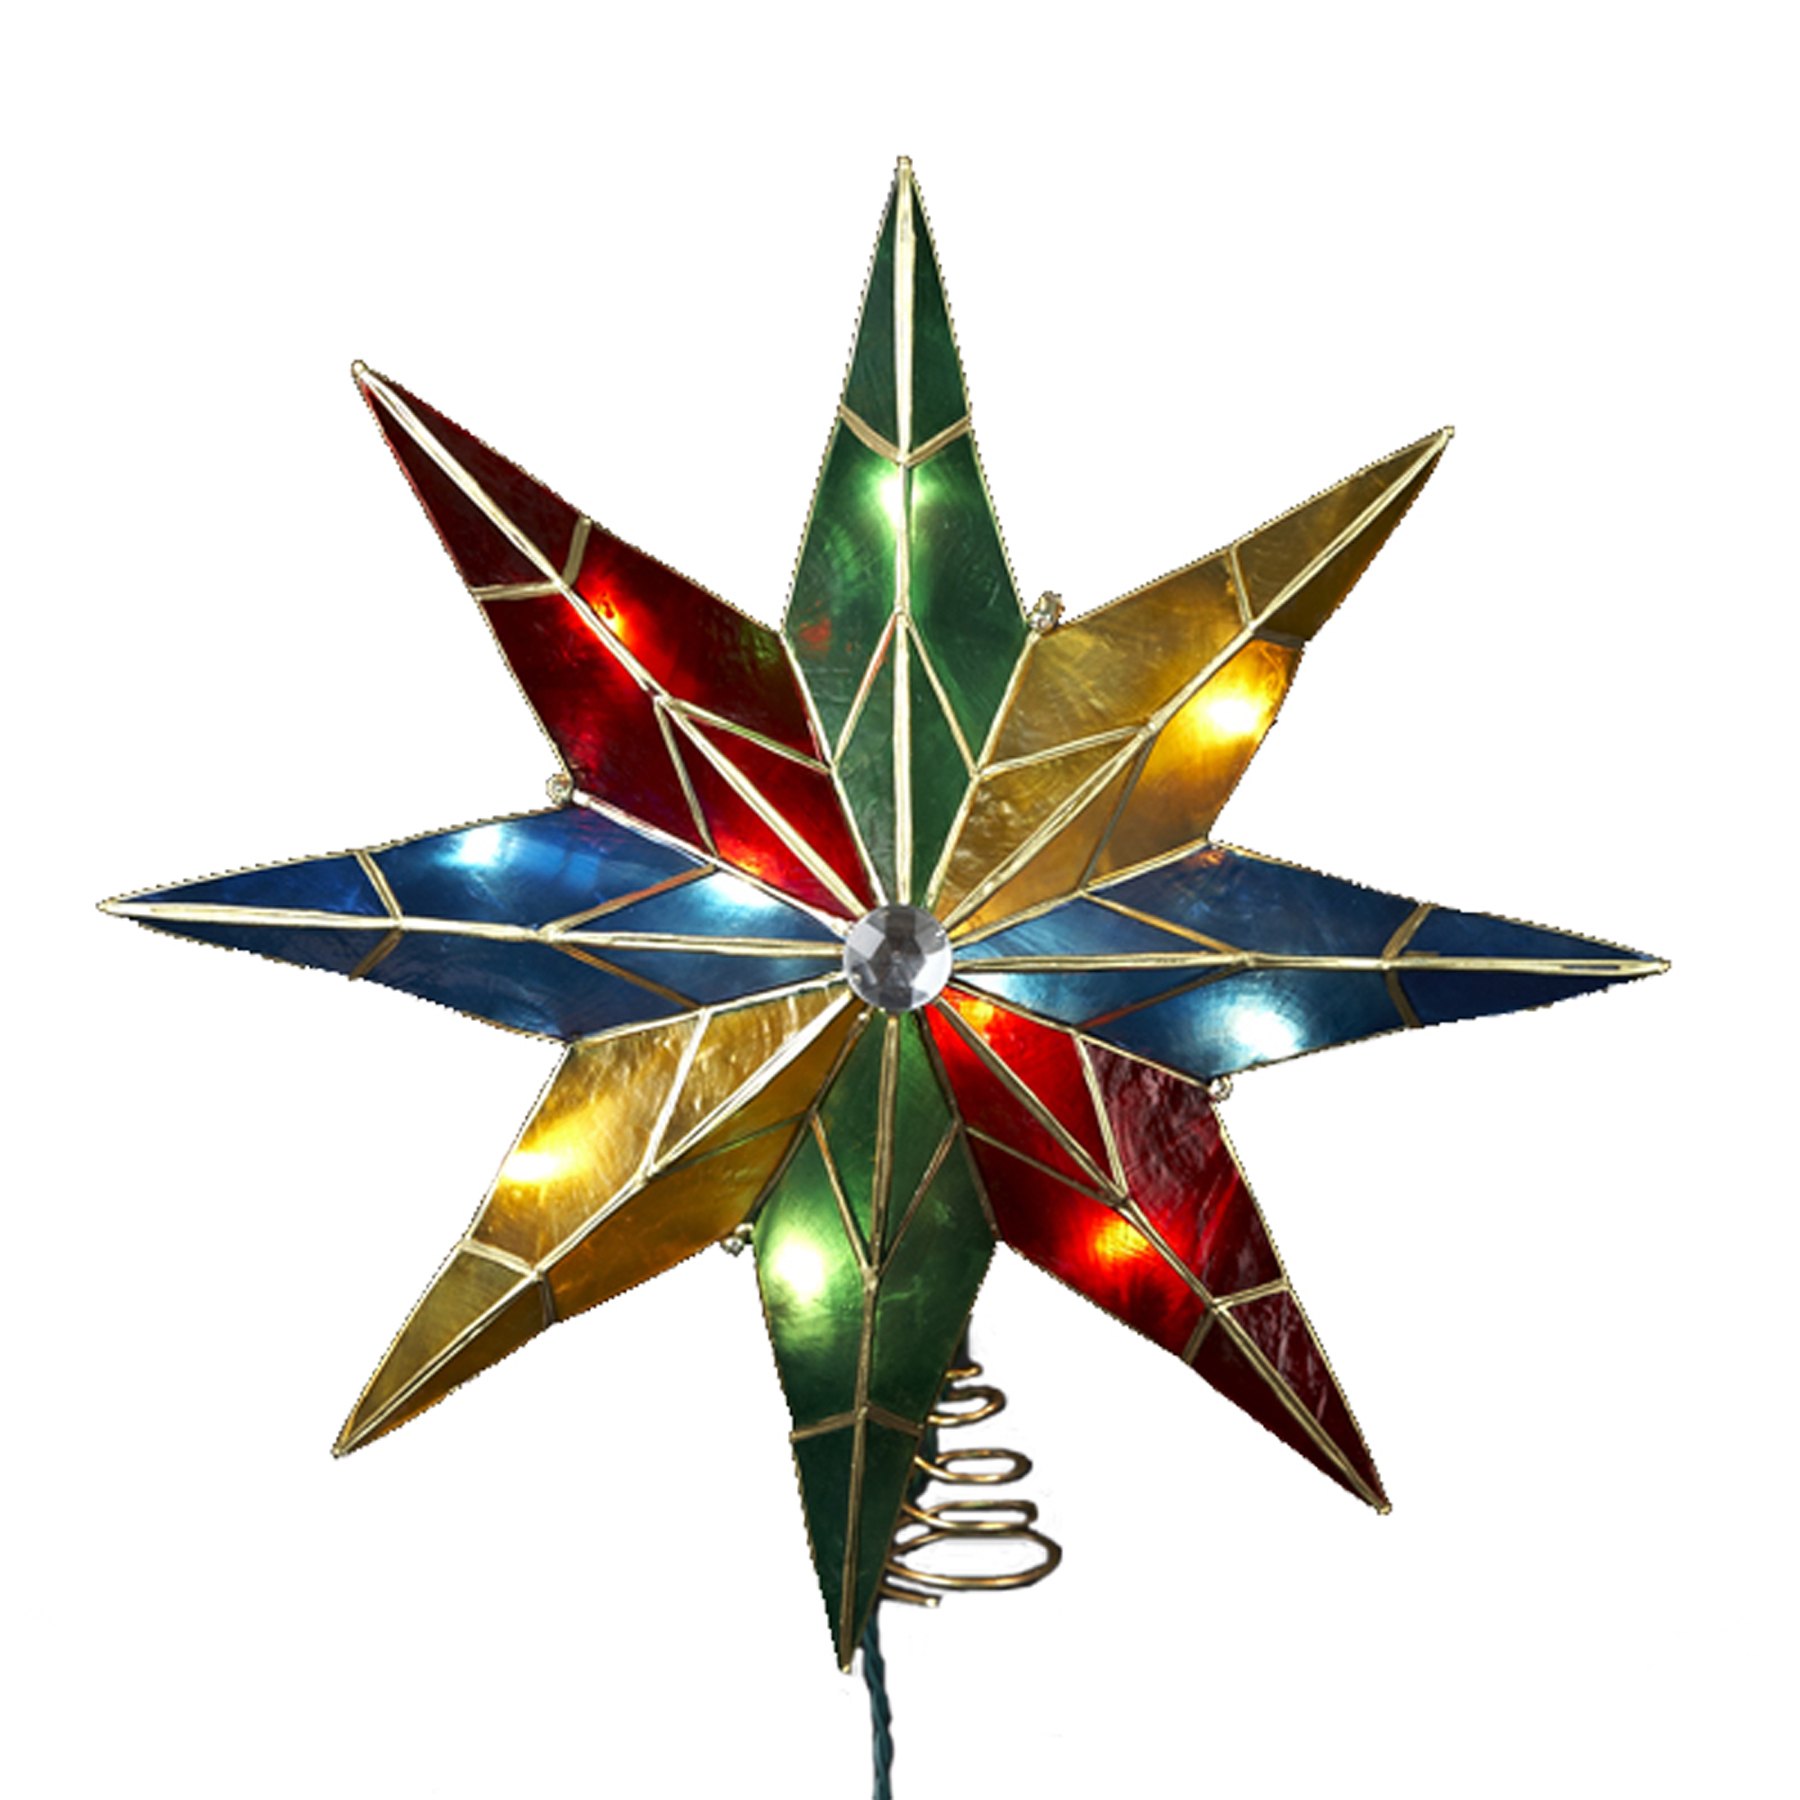 14" 8-Point Star with Center Gem Treetop